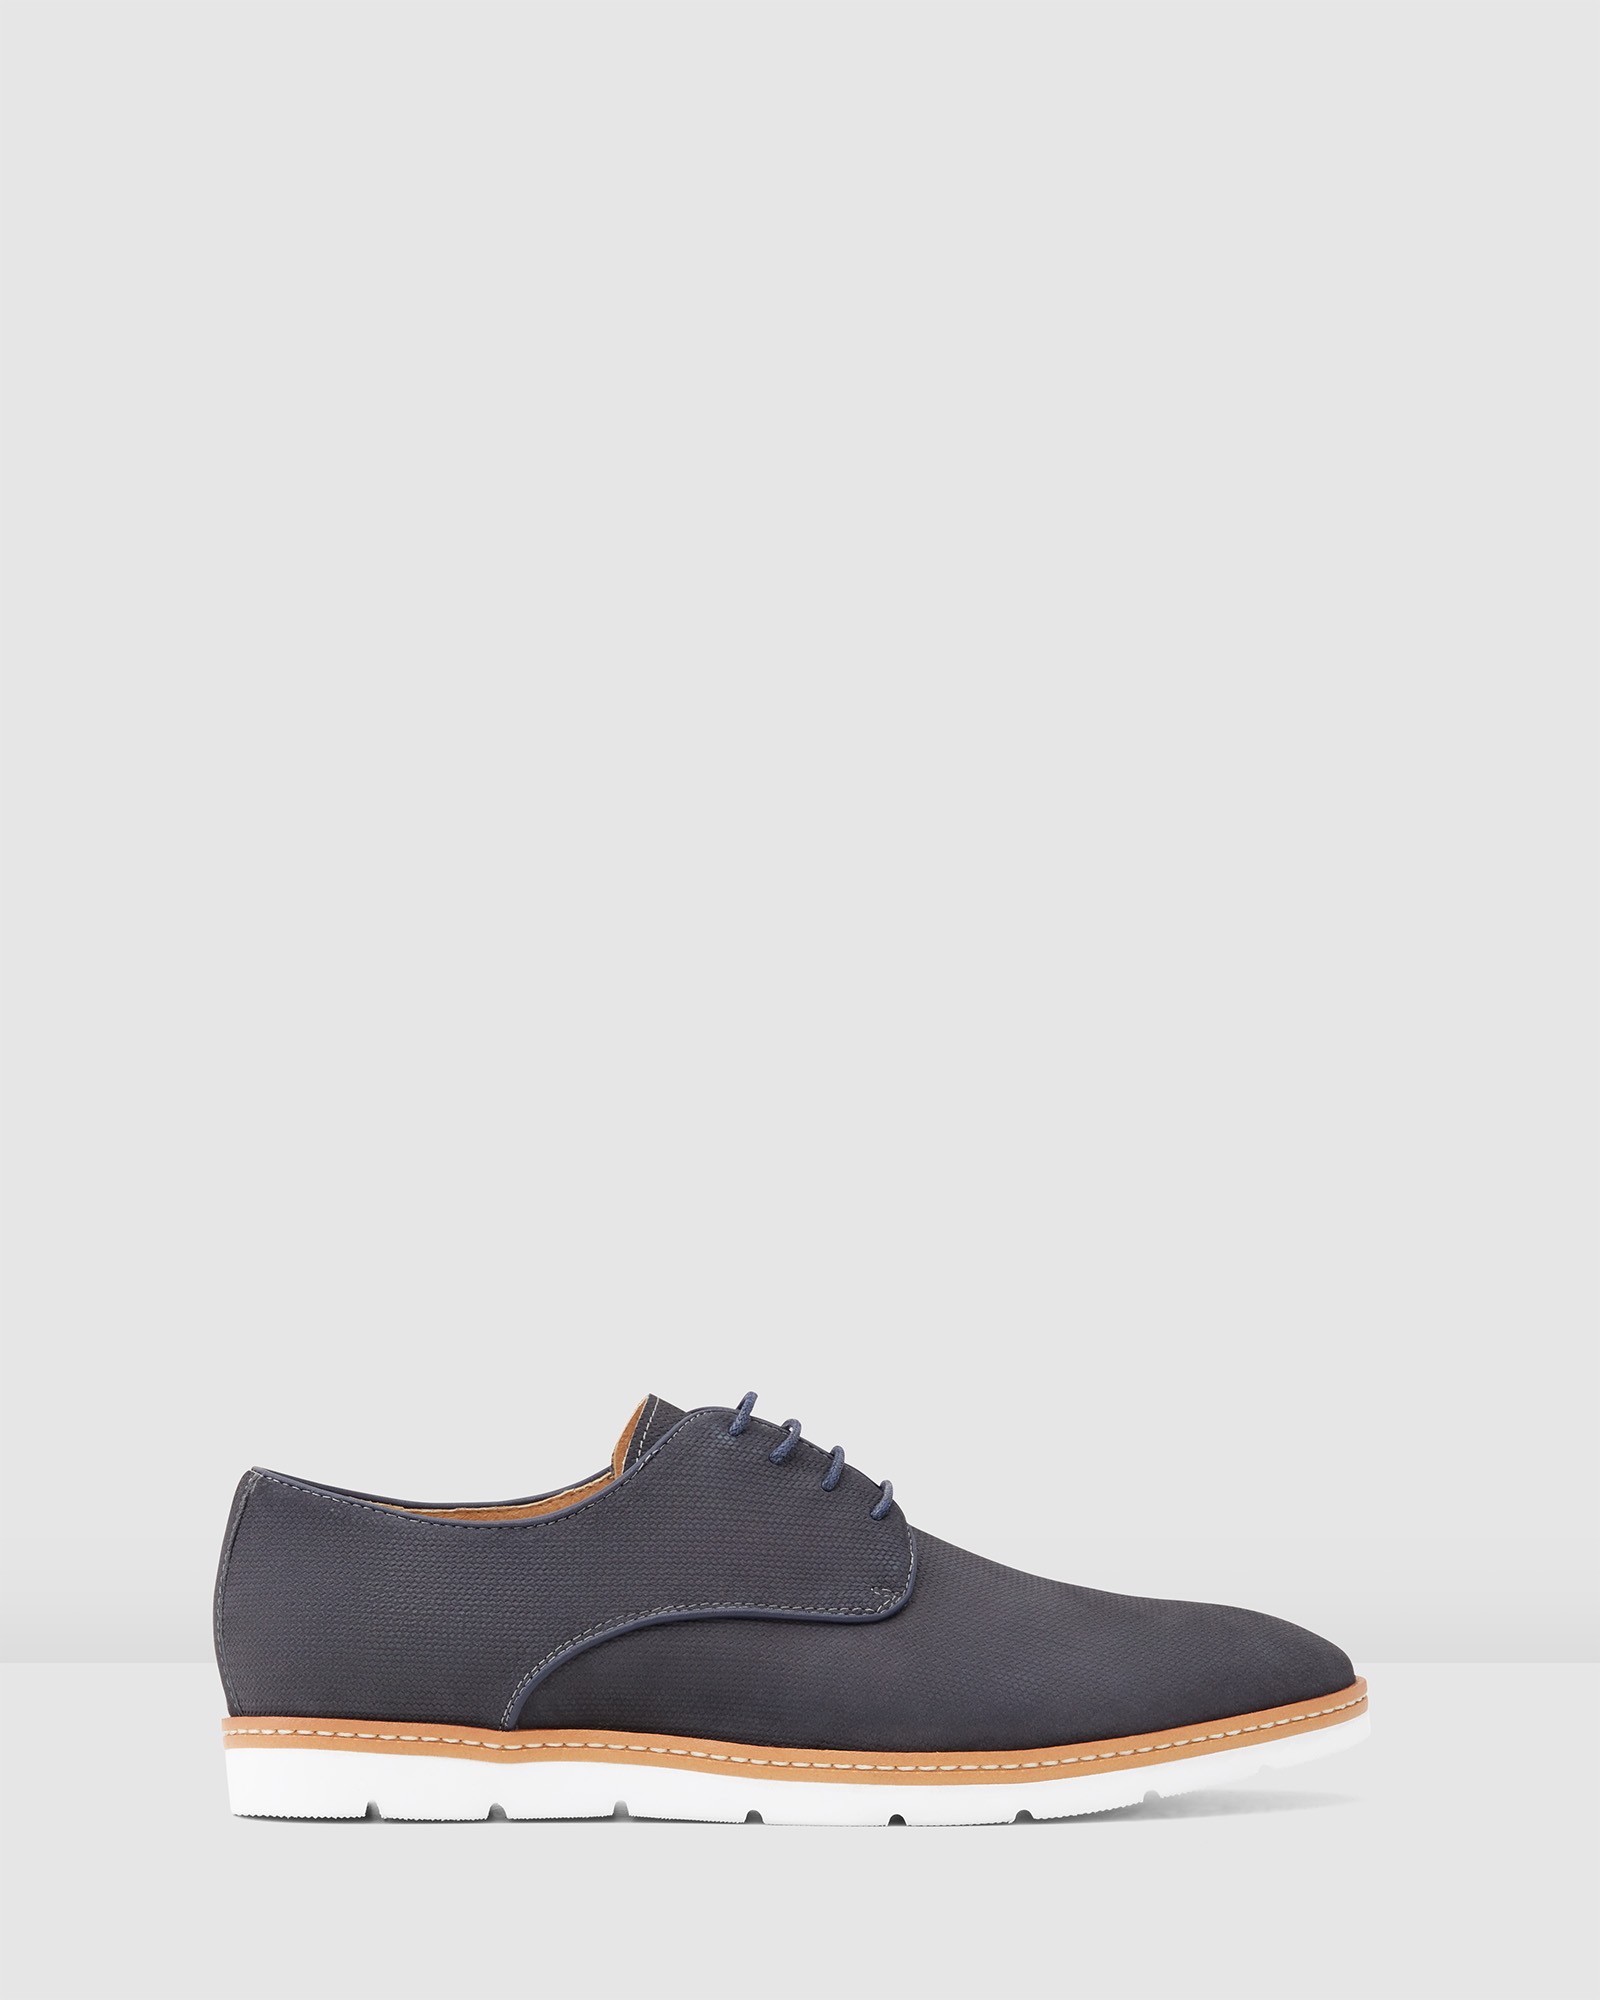 Jackman Lace Ups Navy by Aquila | ShoeSales